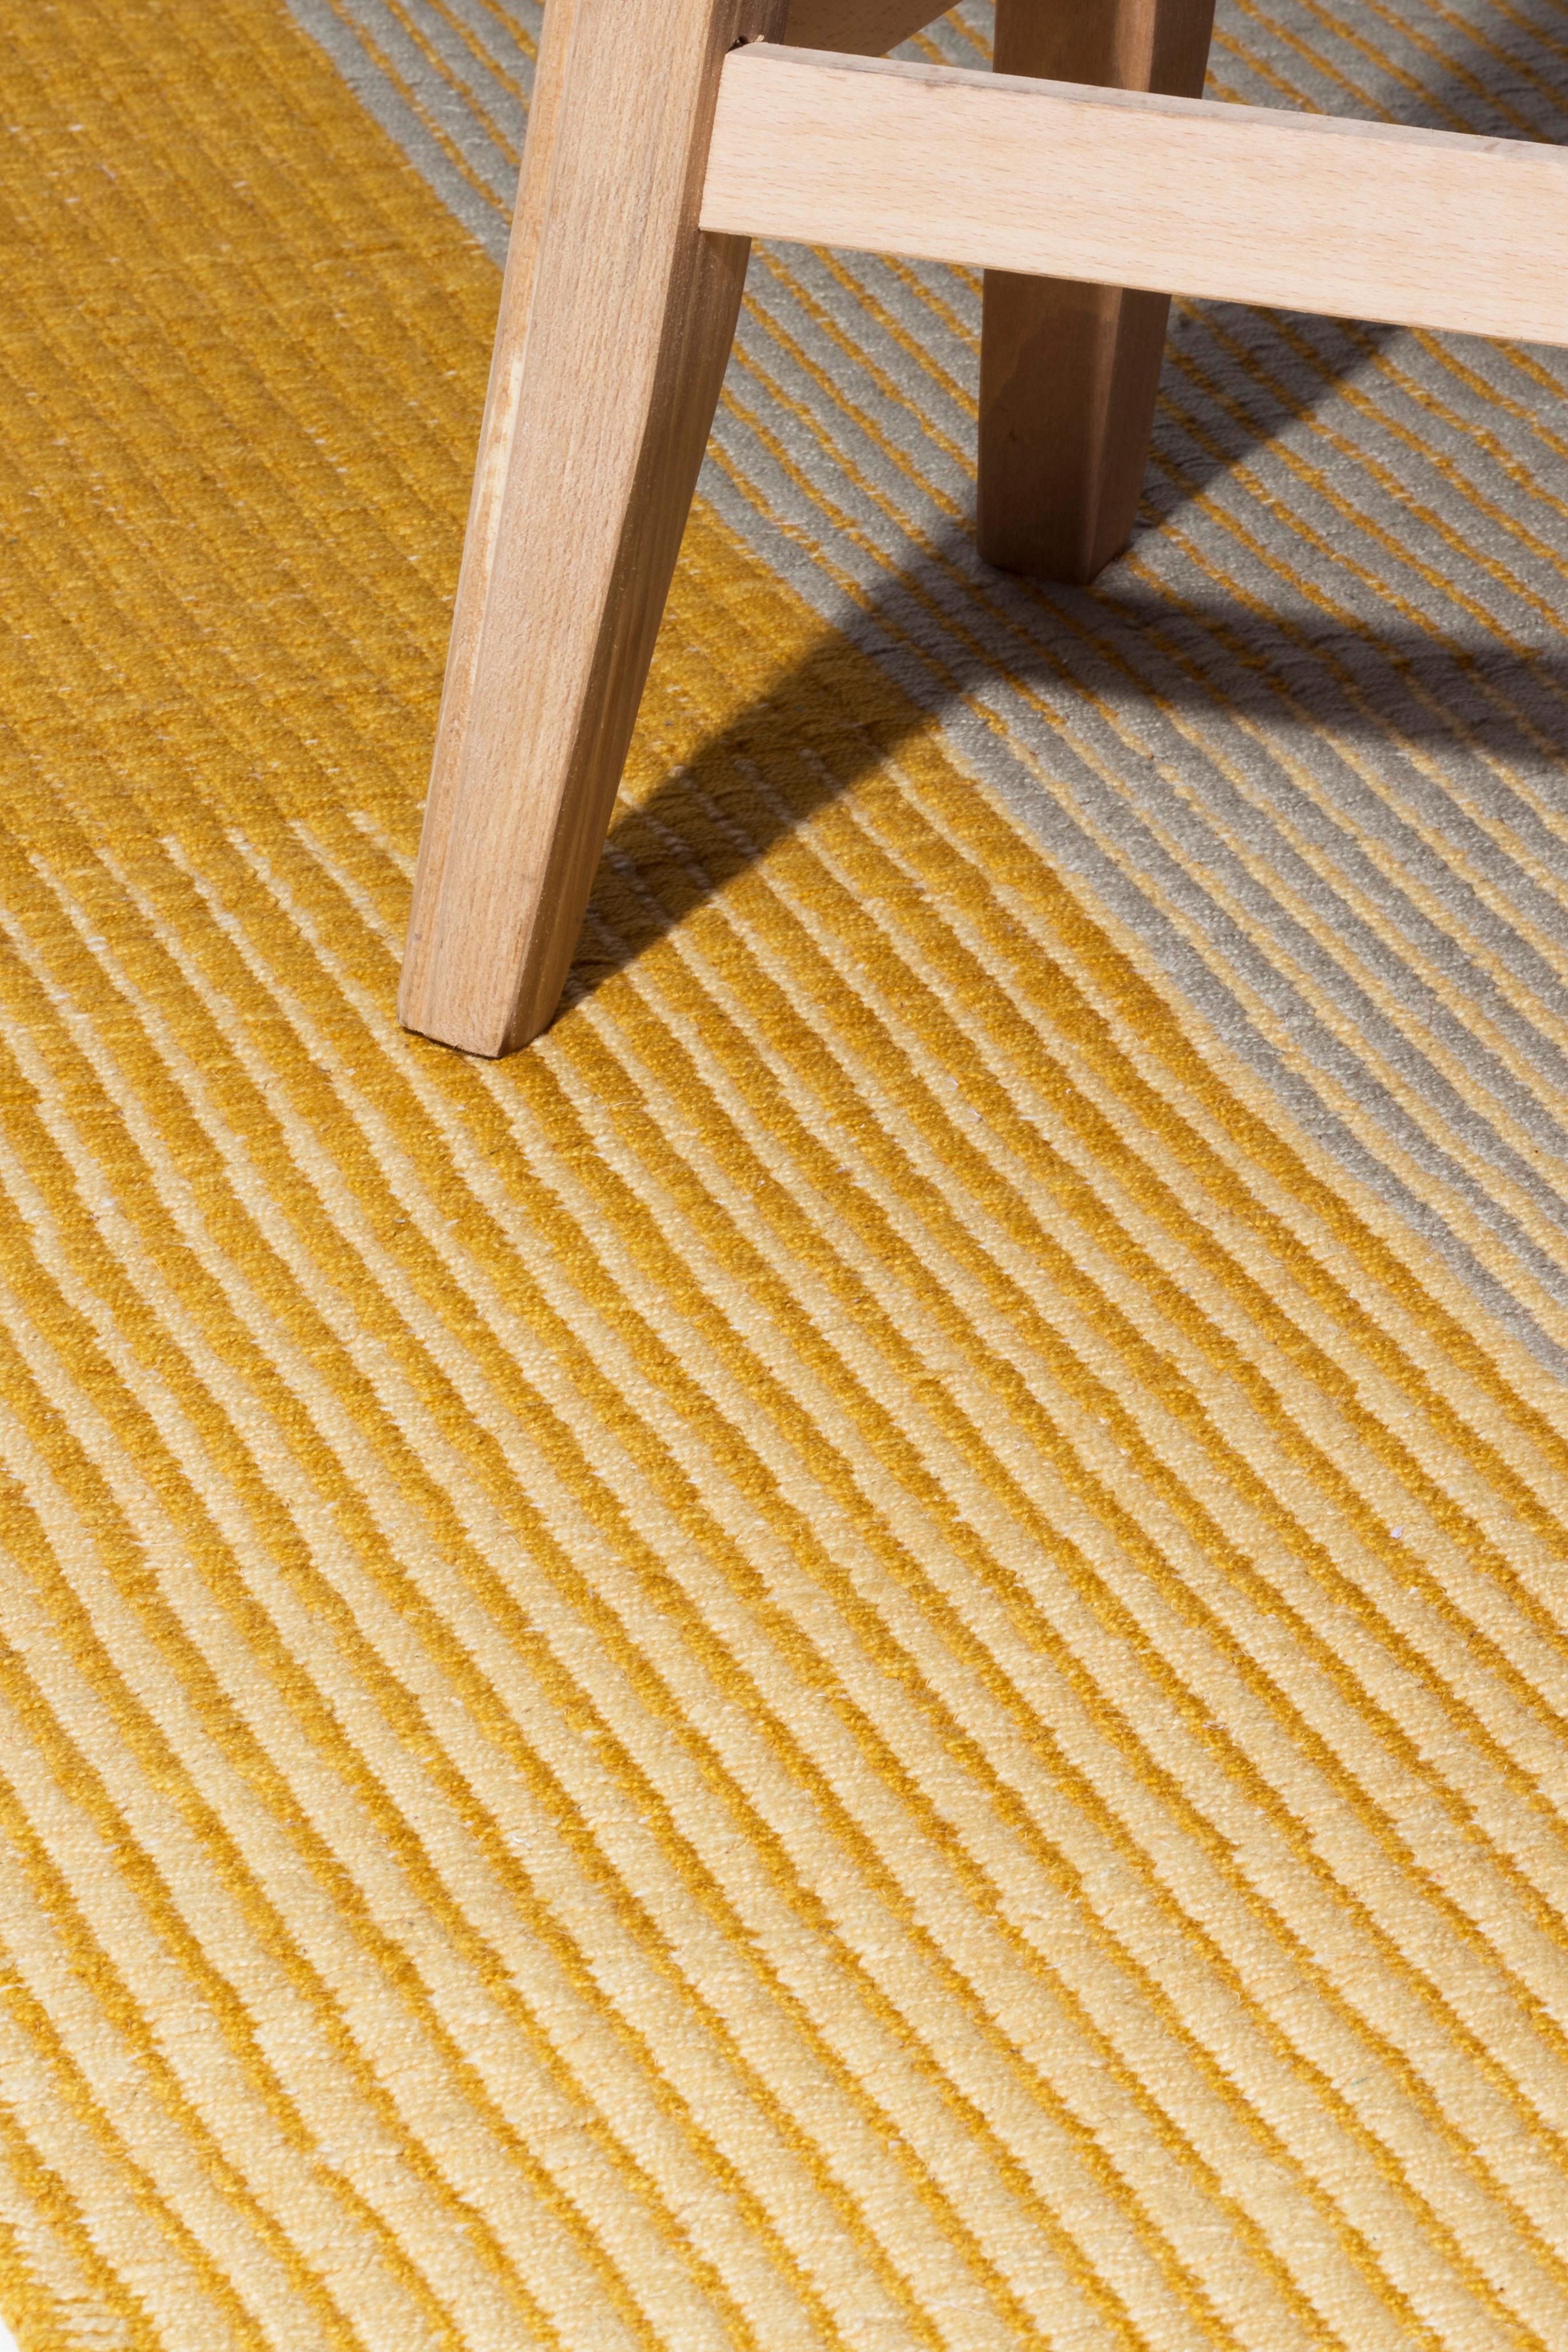 Haze is a contemporary kilim rug collection inspired by the hazy view of landforms layered behind each other on a misty morning in Tuscany.

Haze rugs have a unique corduroy texture. The subtle change in the thickness of the cords dissolves the